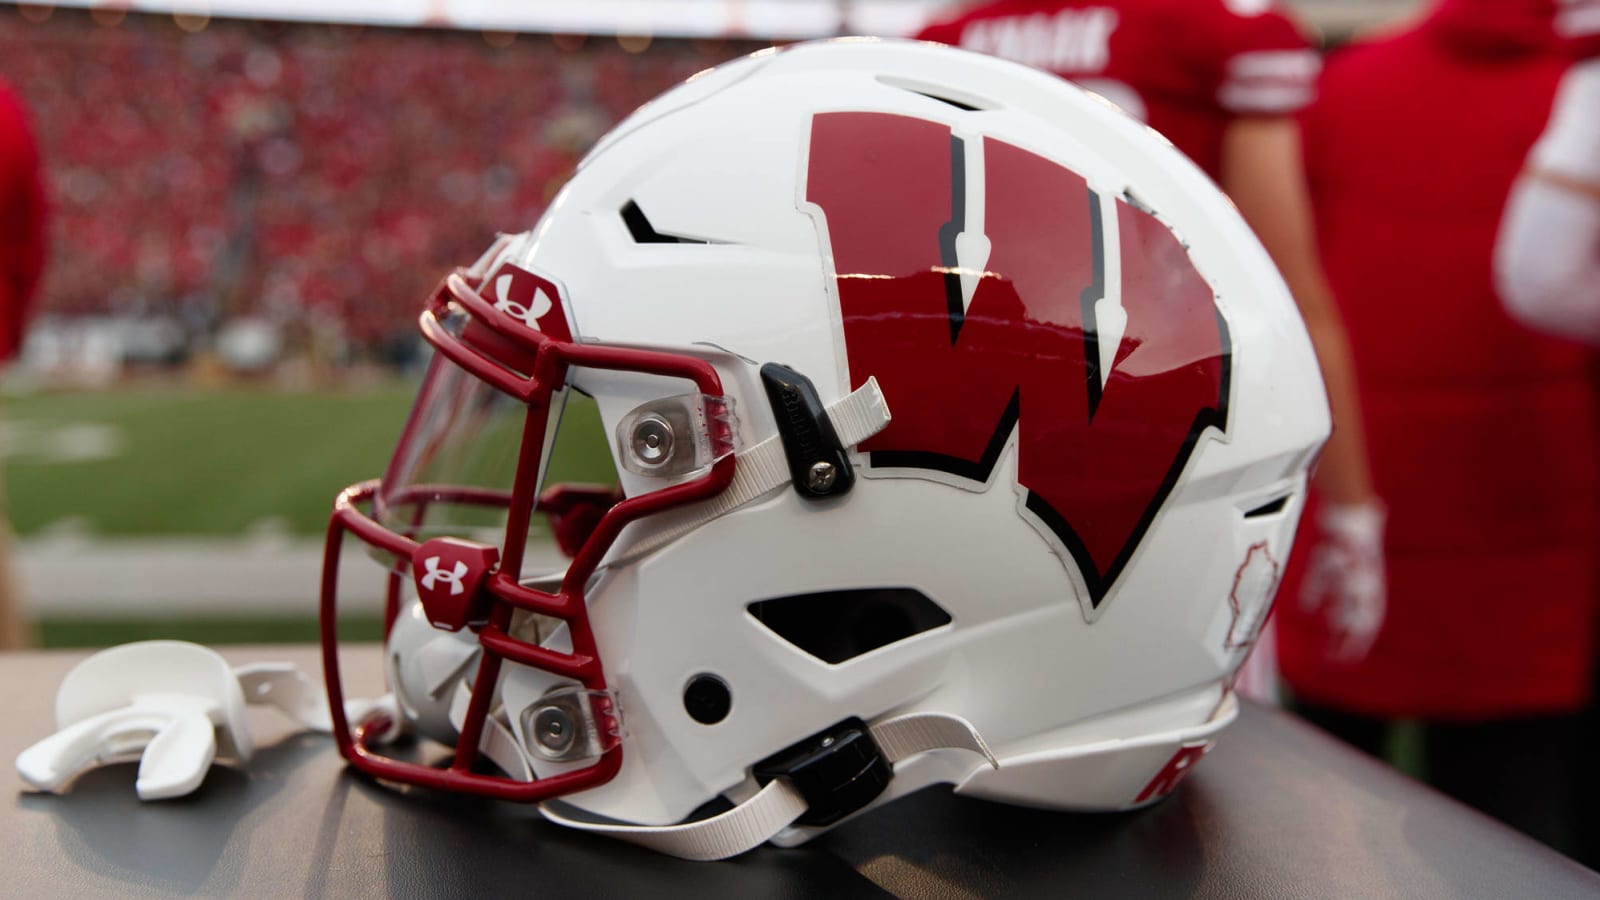 Minnesota-Wisconsin game canceled due to COVID-19